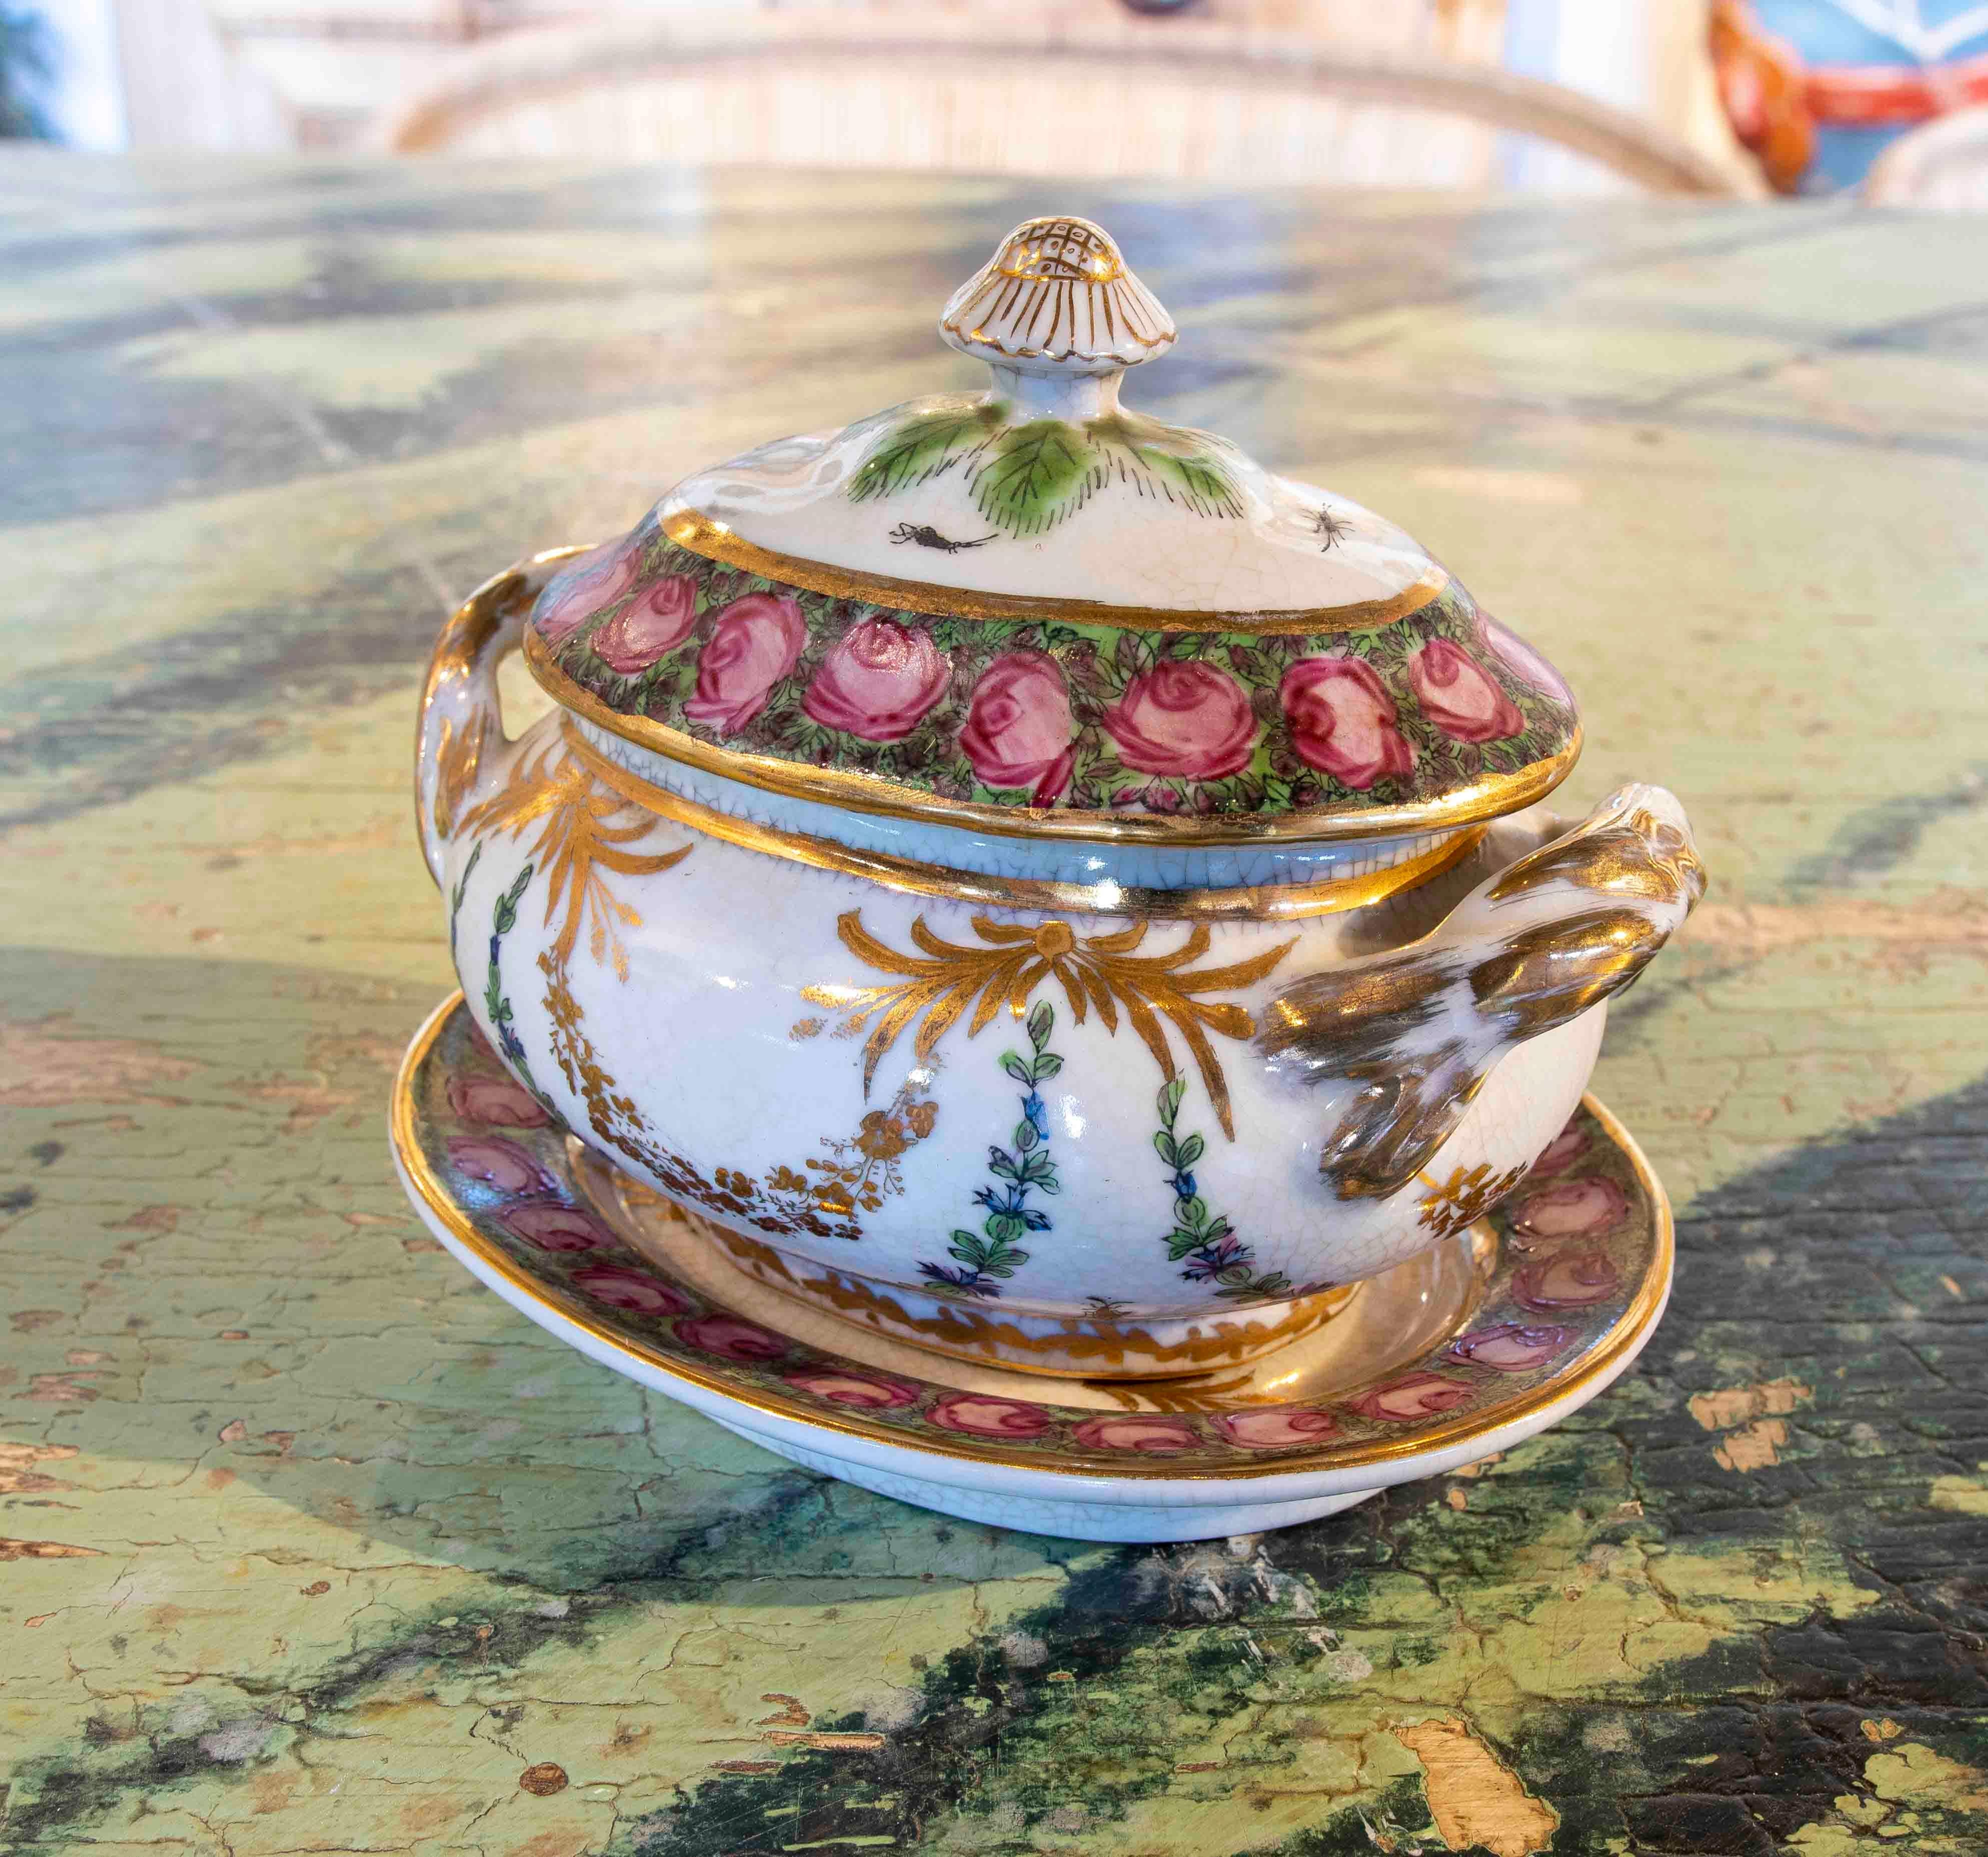 1970s Individual Hand-Painted Porcelain Tureen with Inscription.